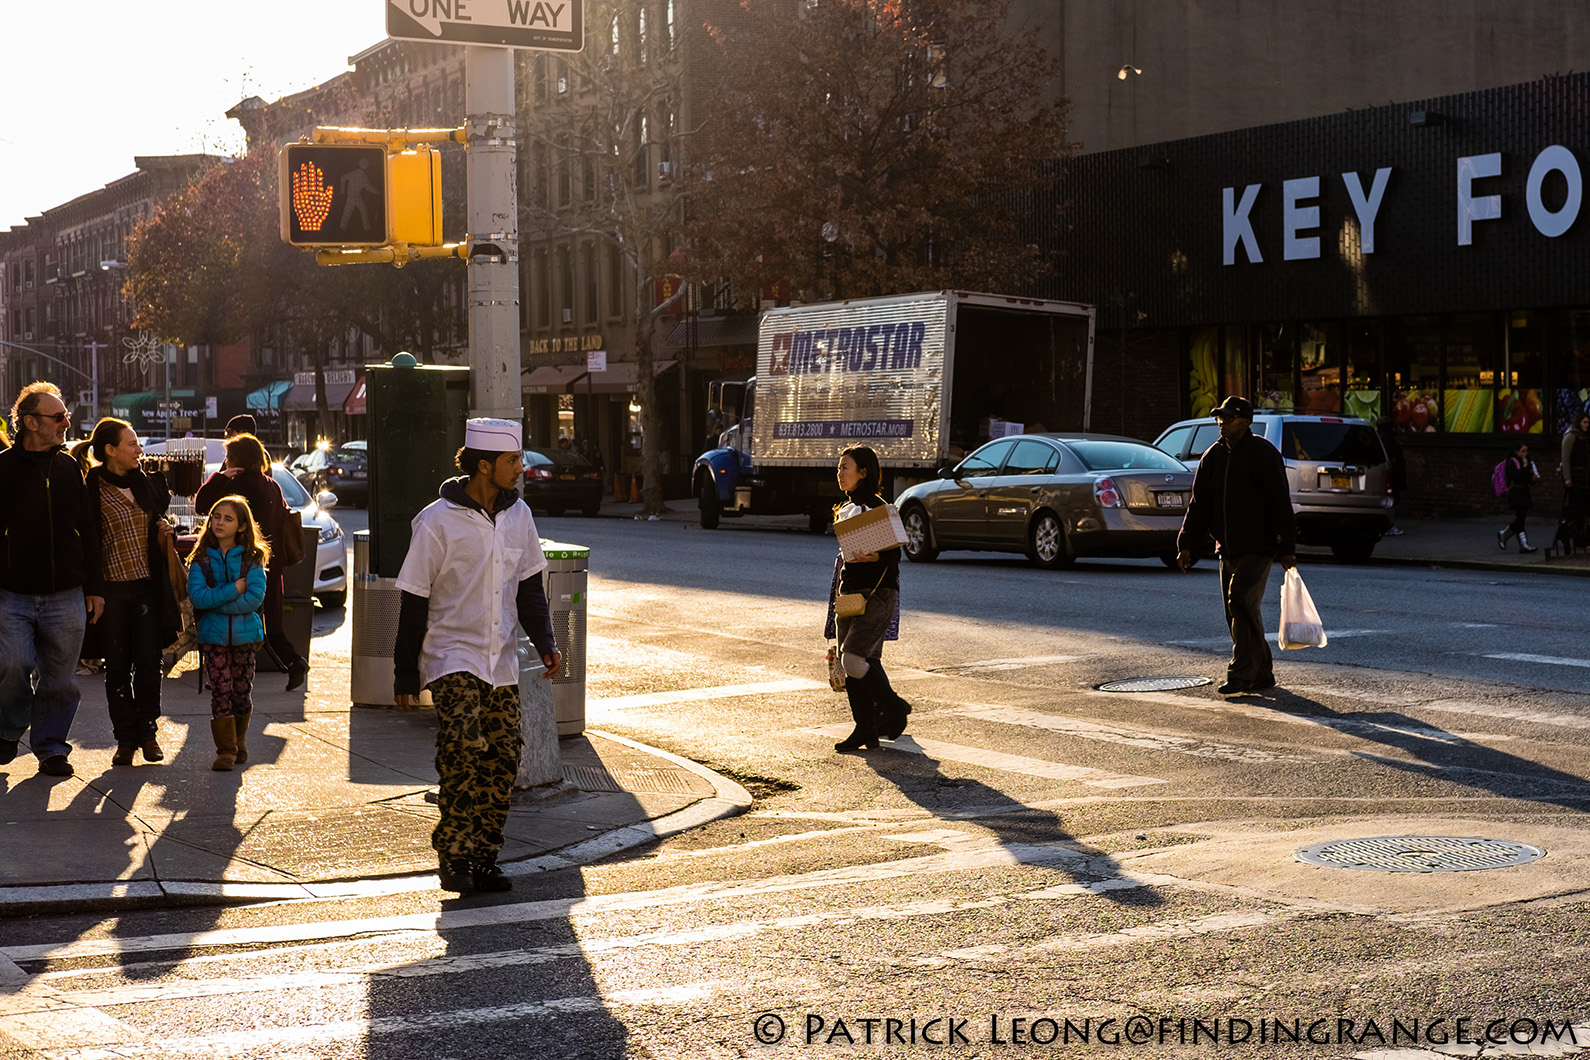 A Visit to Park Slope With The Fuji XF 35mm F2 Lens